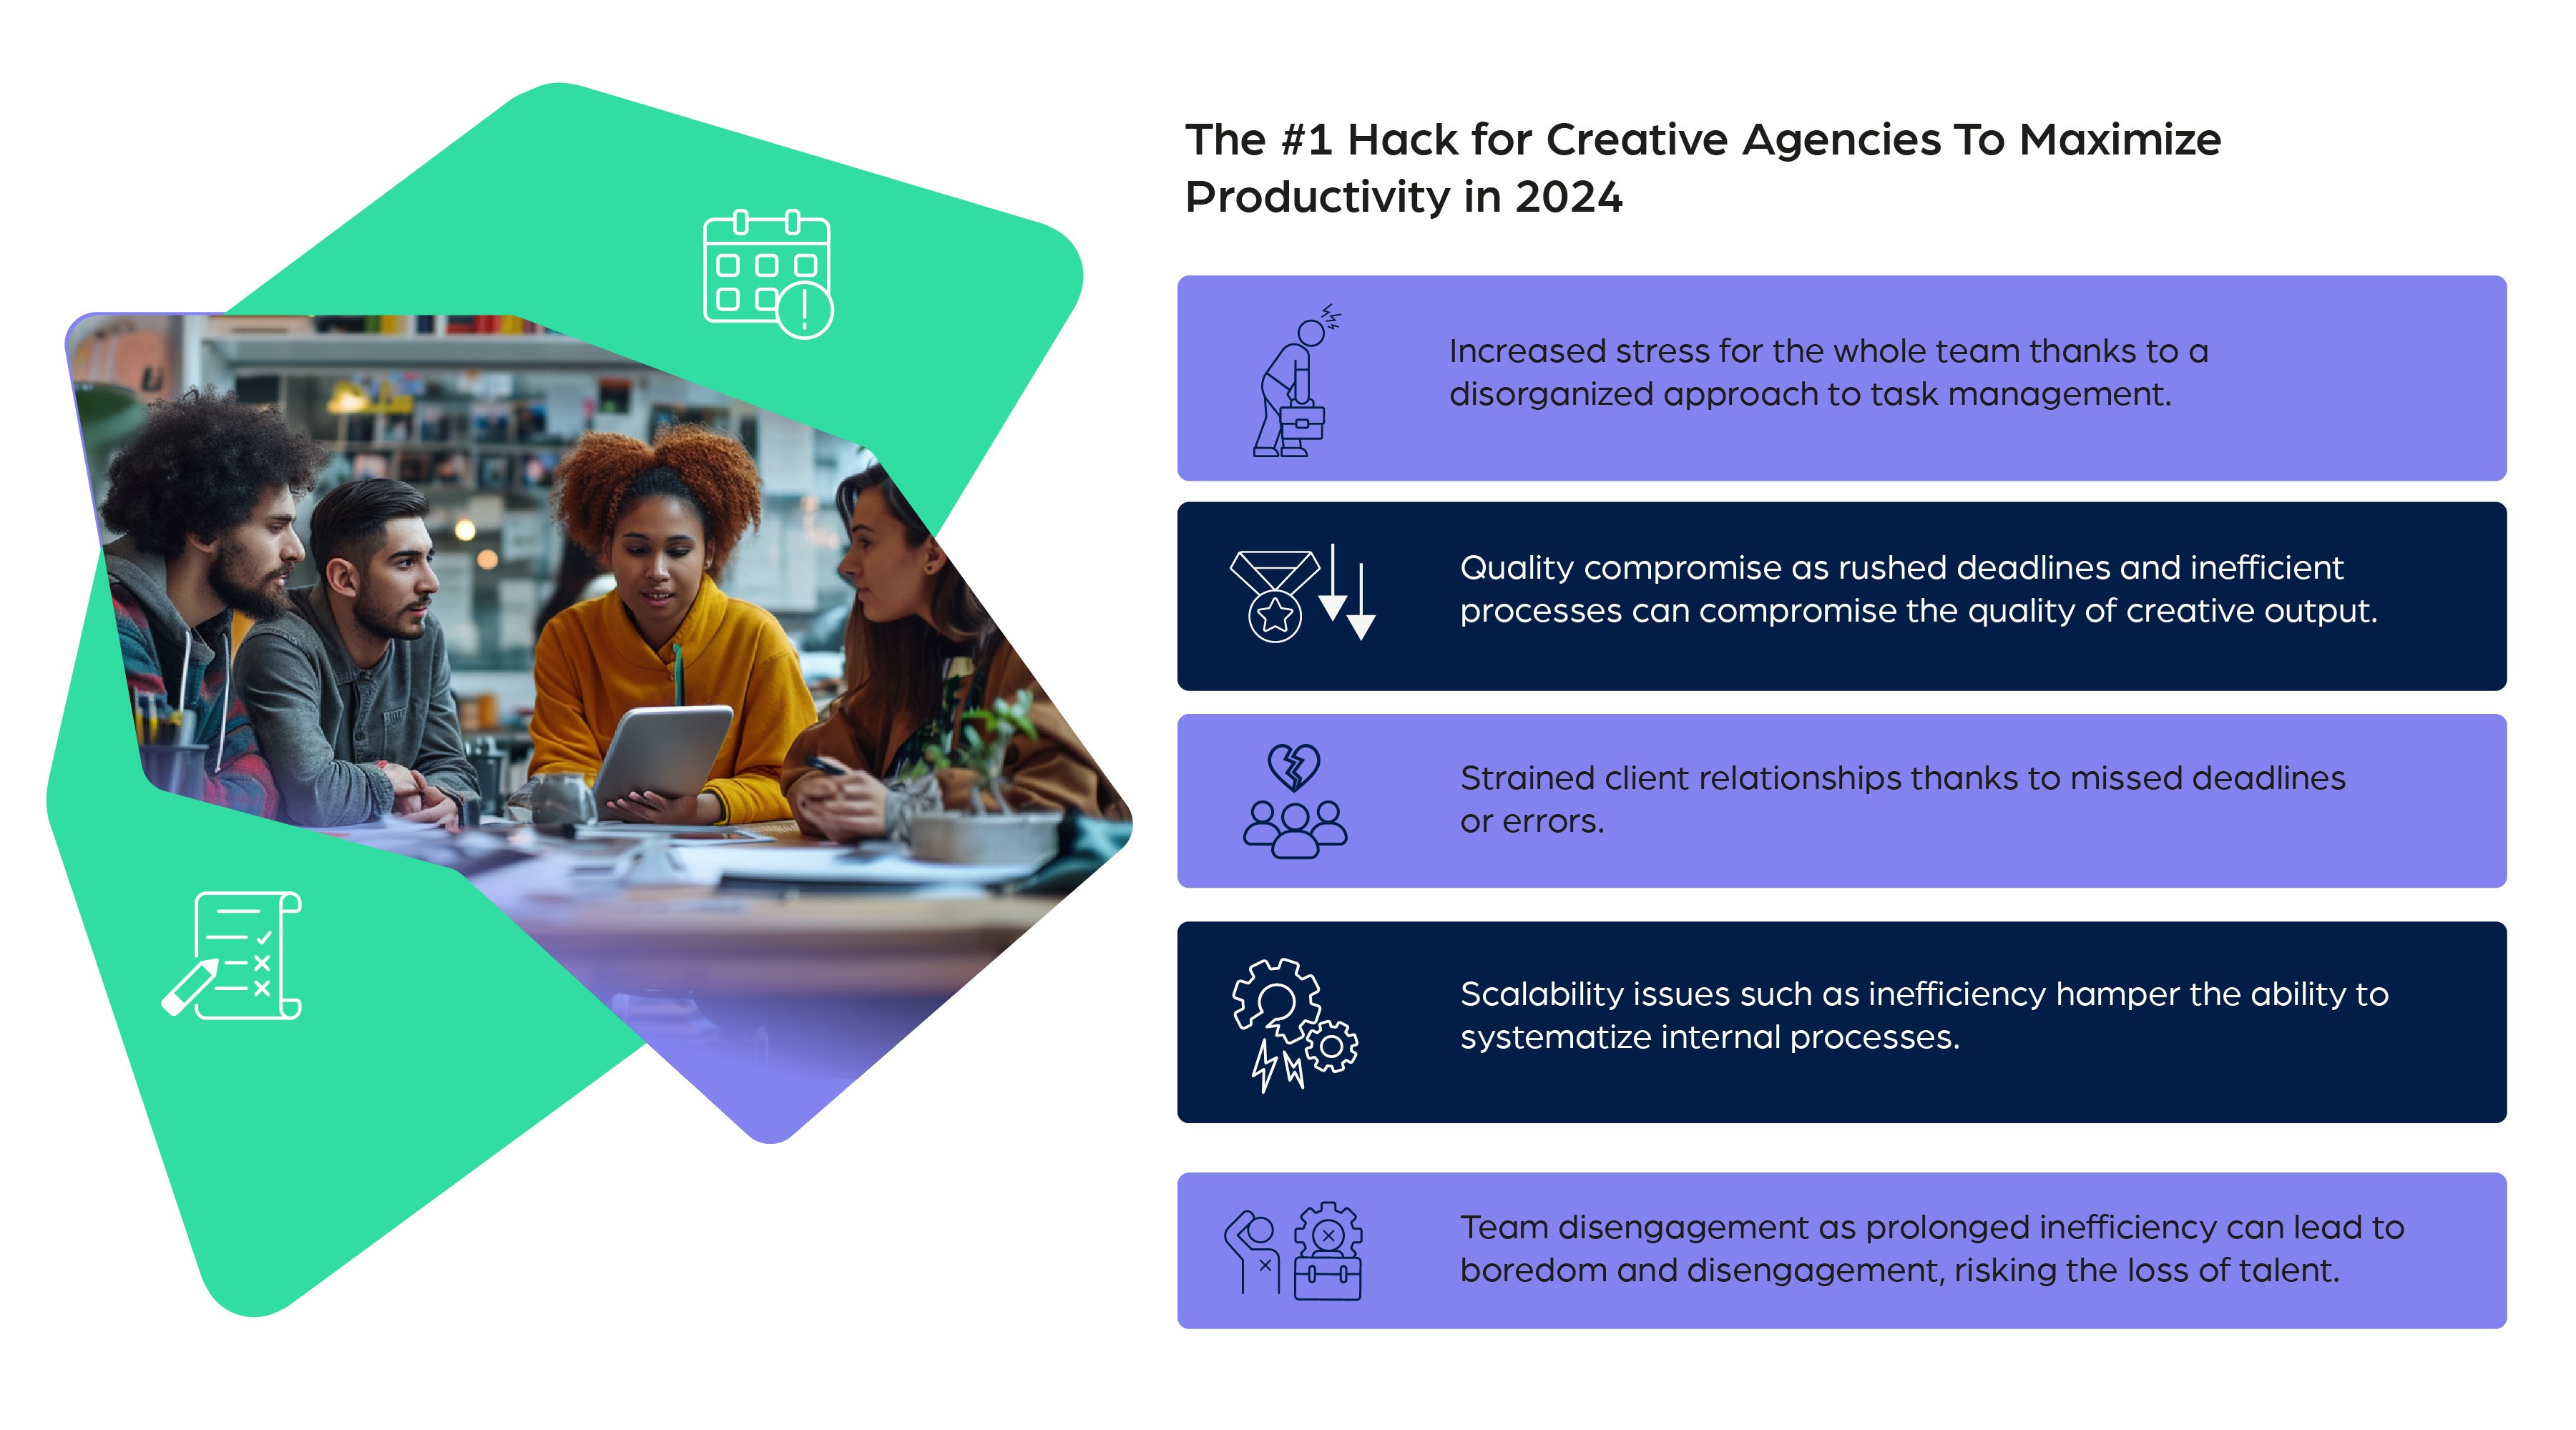 The #1 Hack for Creative Agencies To Maximize Productivity in 2024